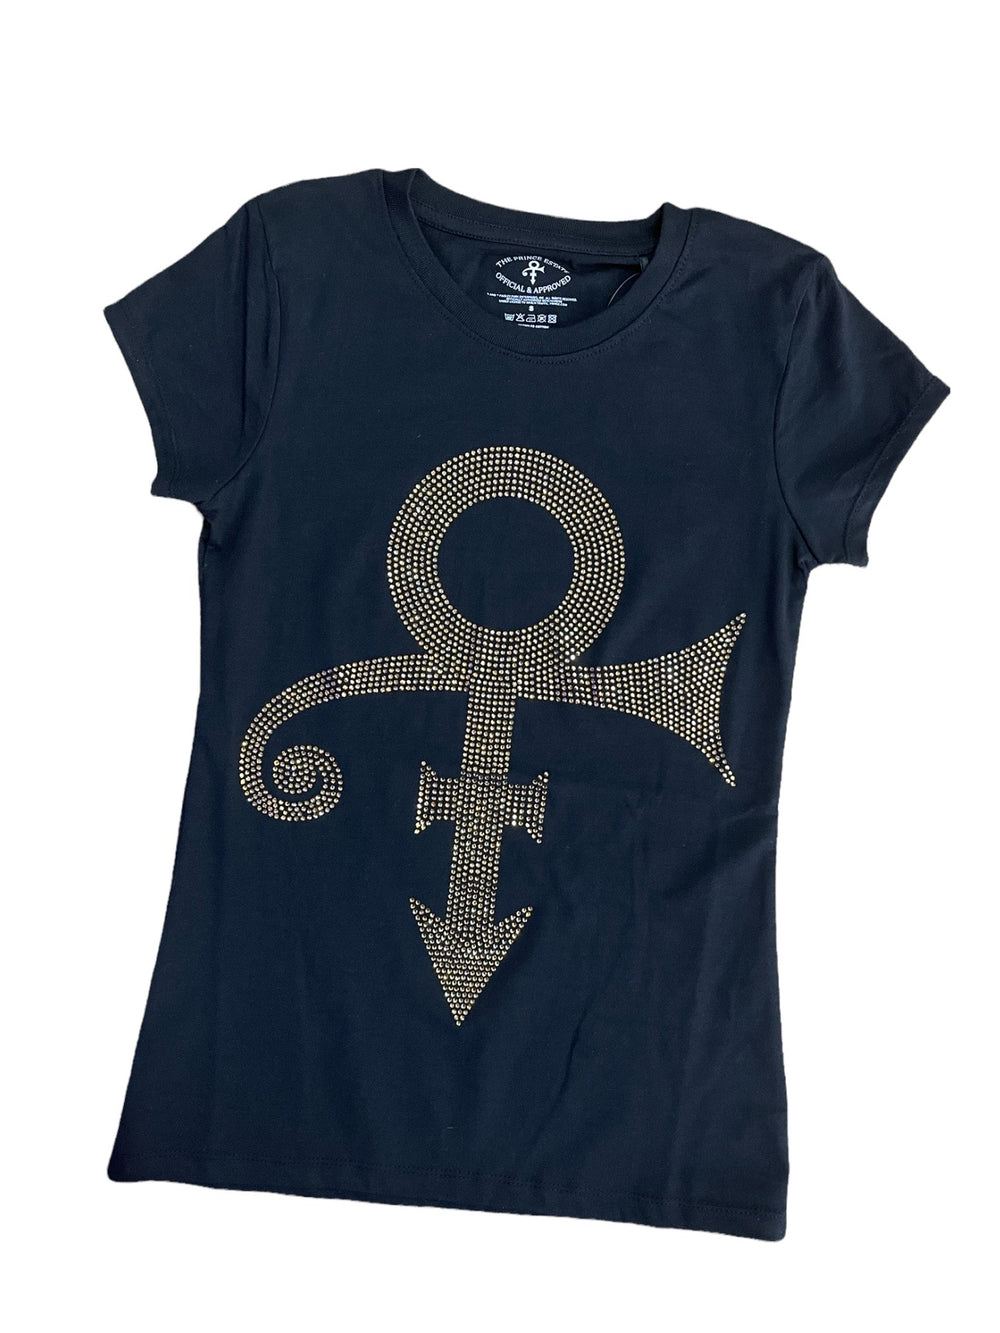 Prince The Gold Experience Love Symbol Diamante Official Ladies Slim Fit T-Shirt